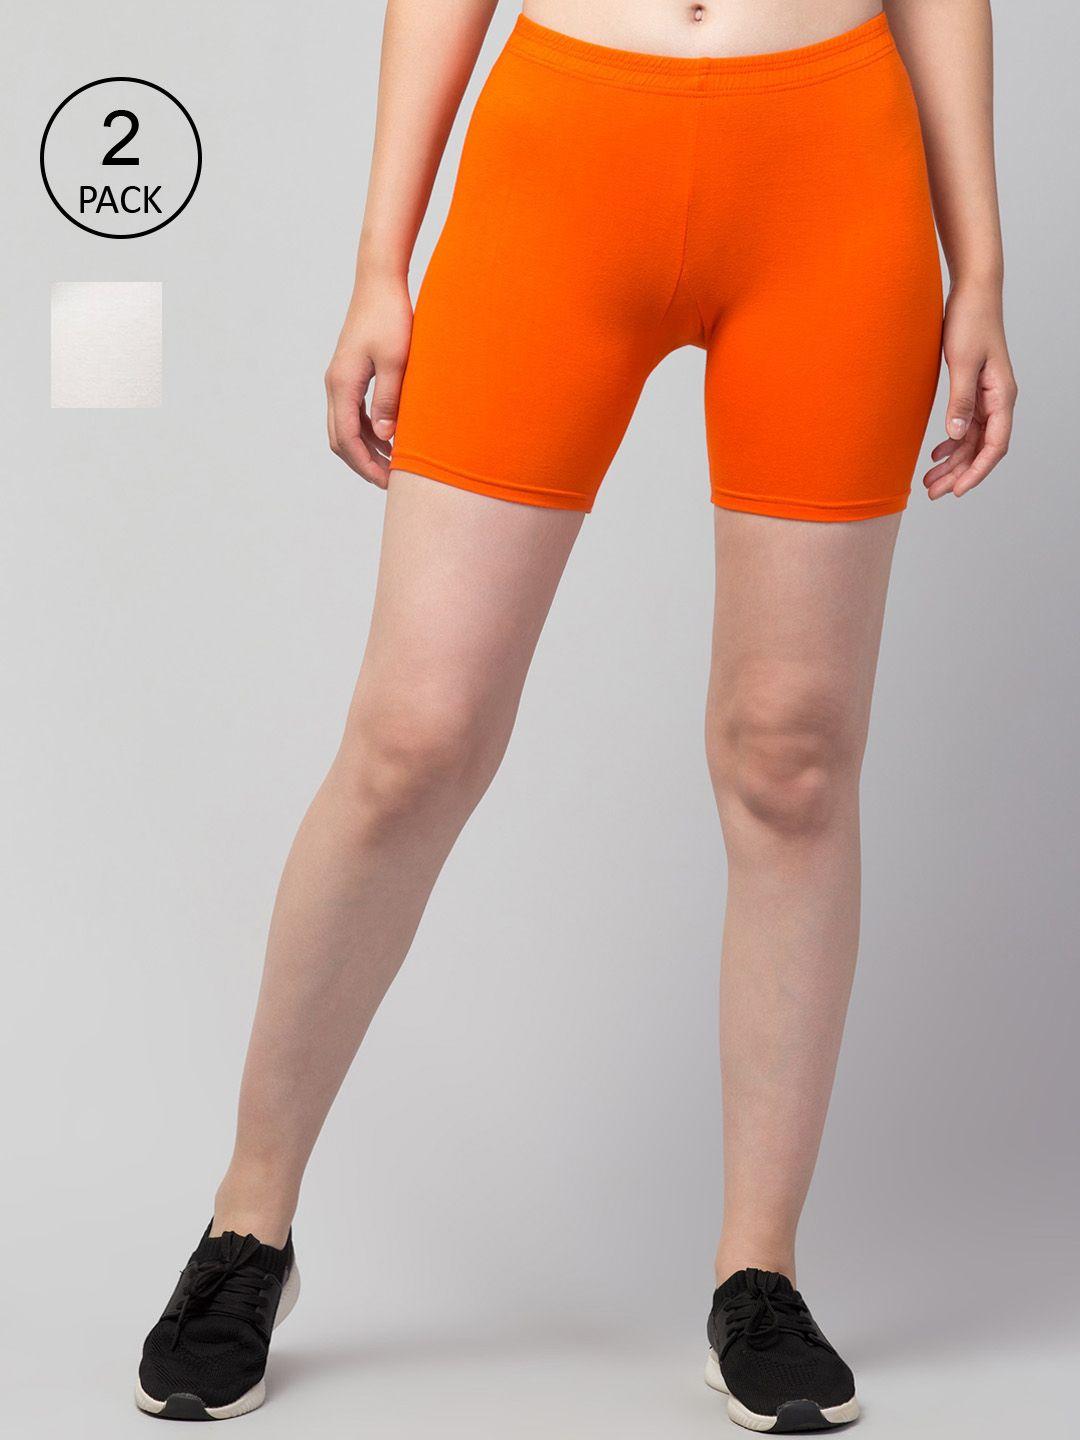 apraa-&-parma-pack-of-2-women-slim-fit-cotton-cycling-sports-shorts